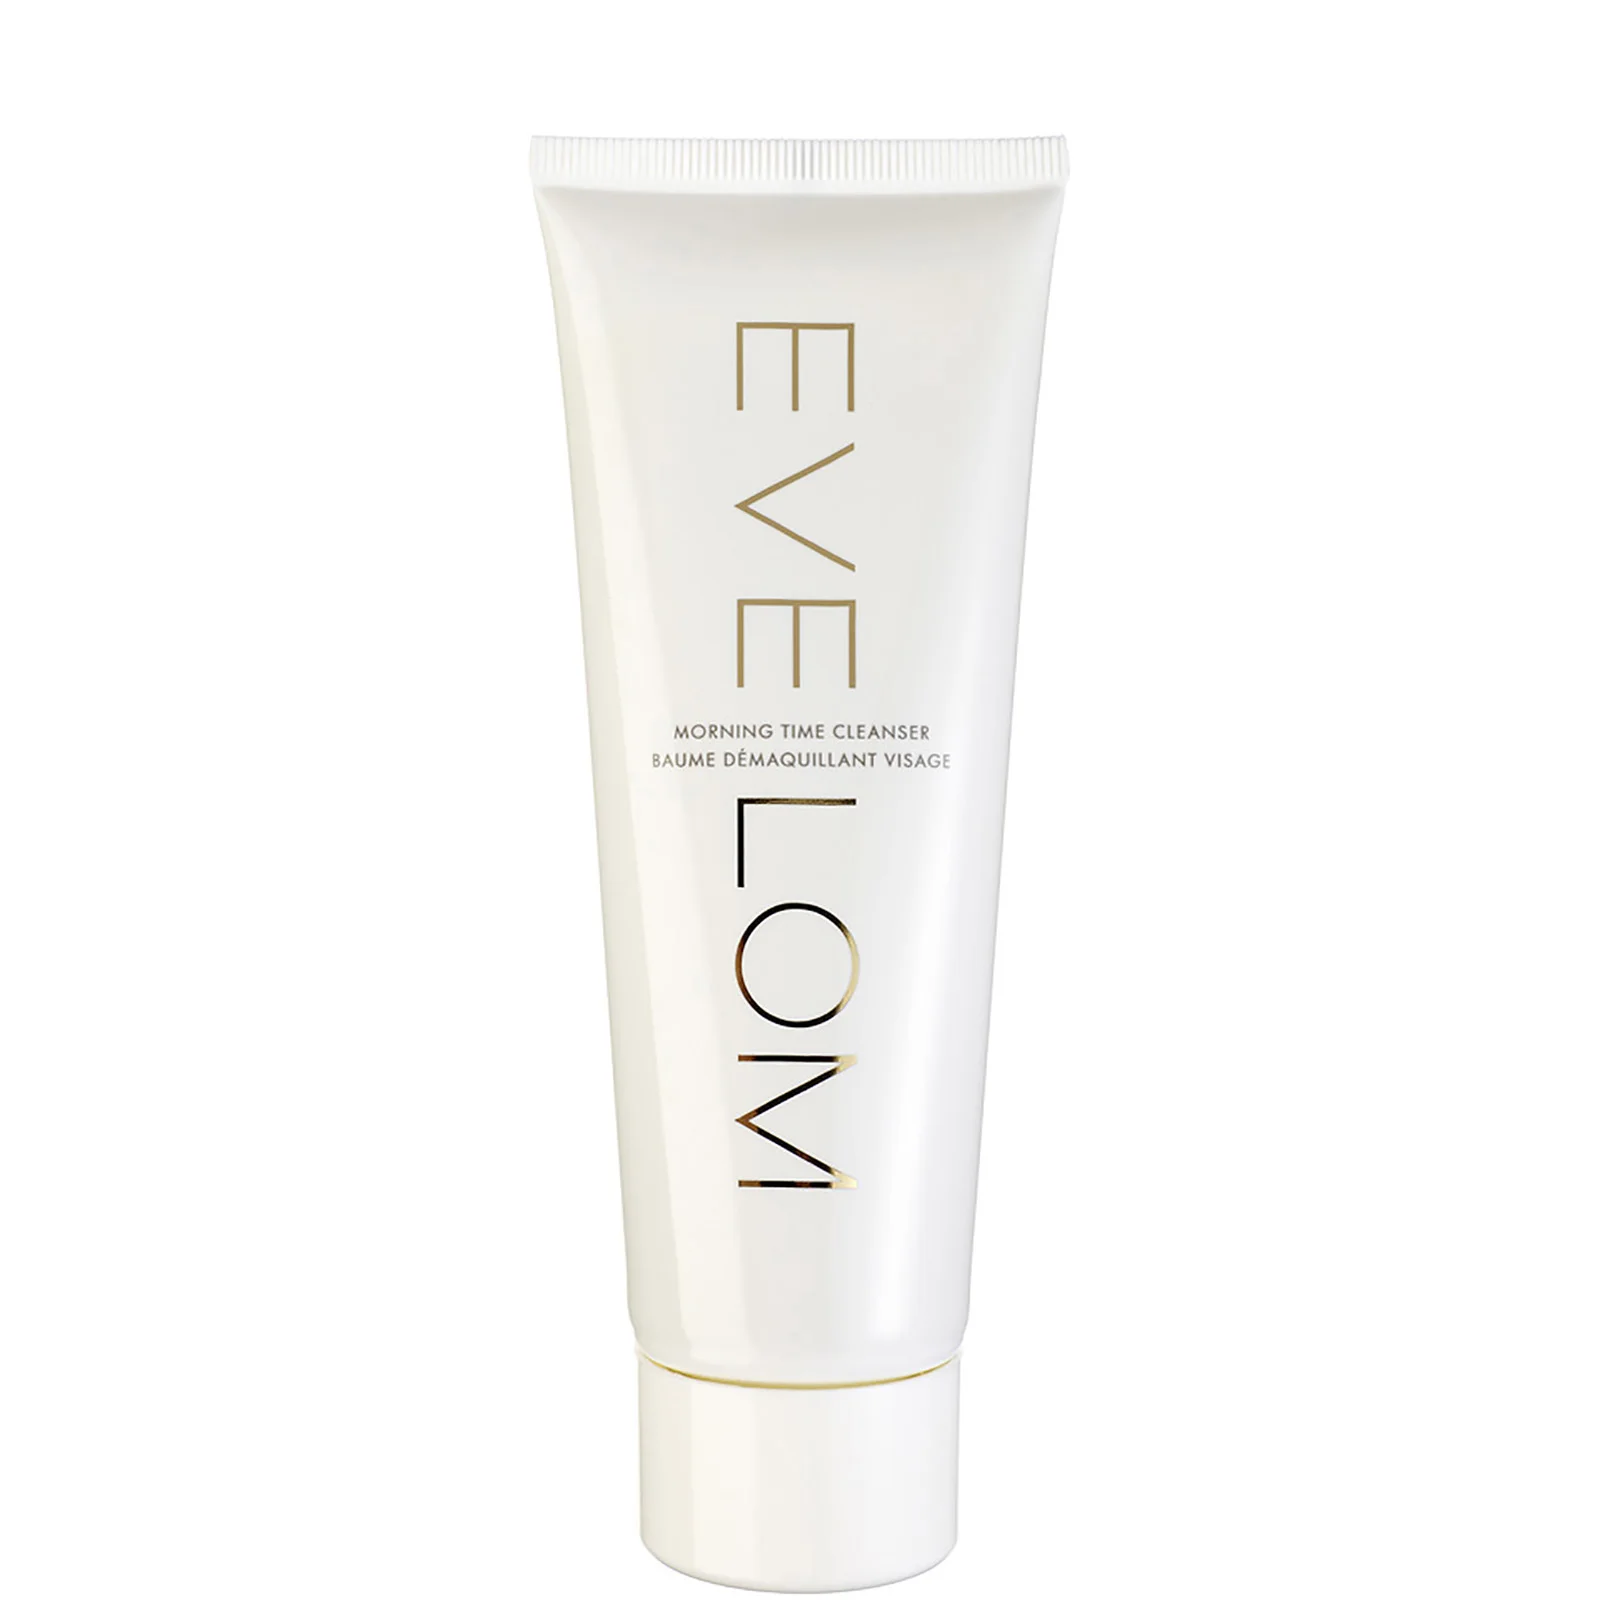 Eve Lom Morning Time Cleanser (125ml) Image 1